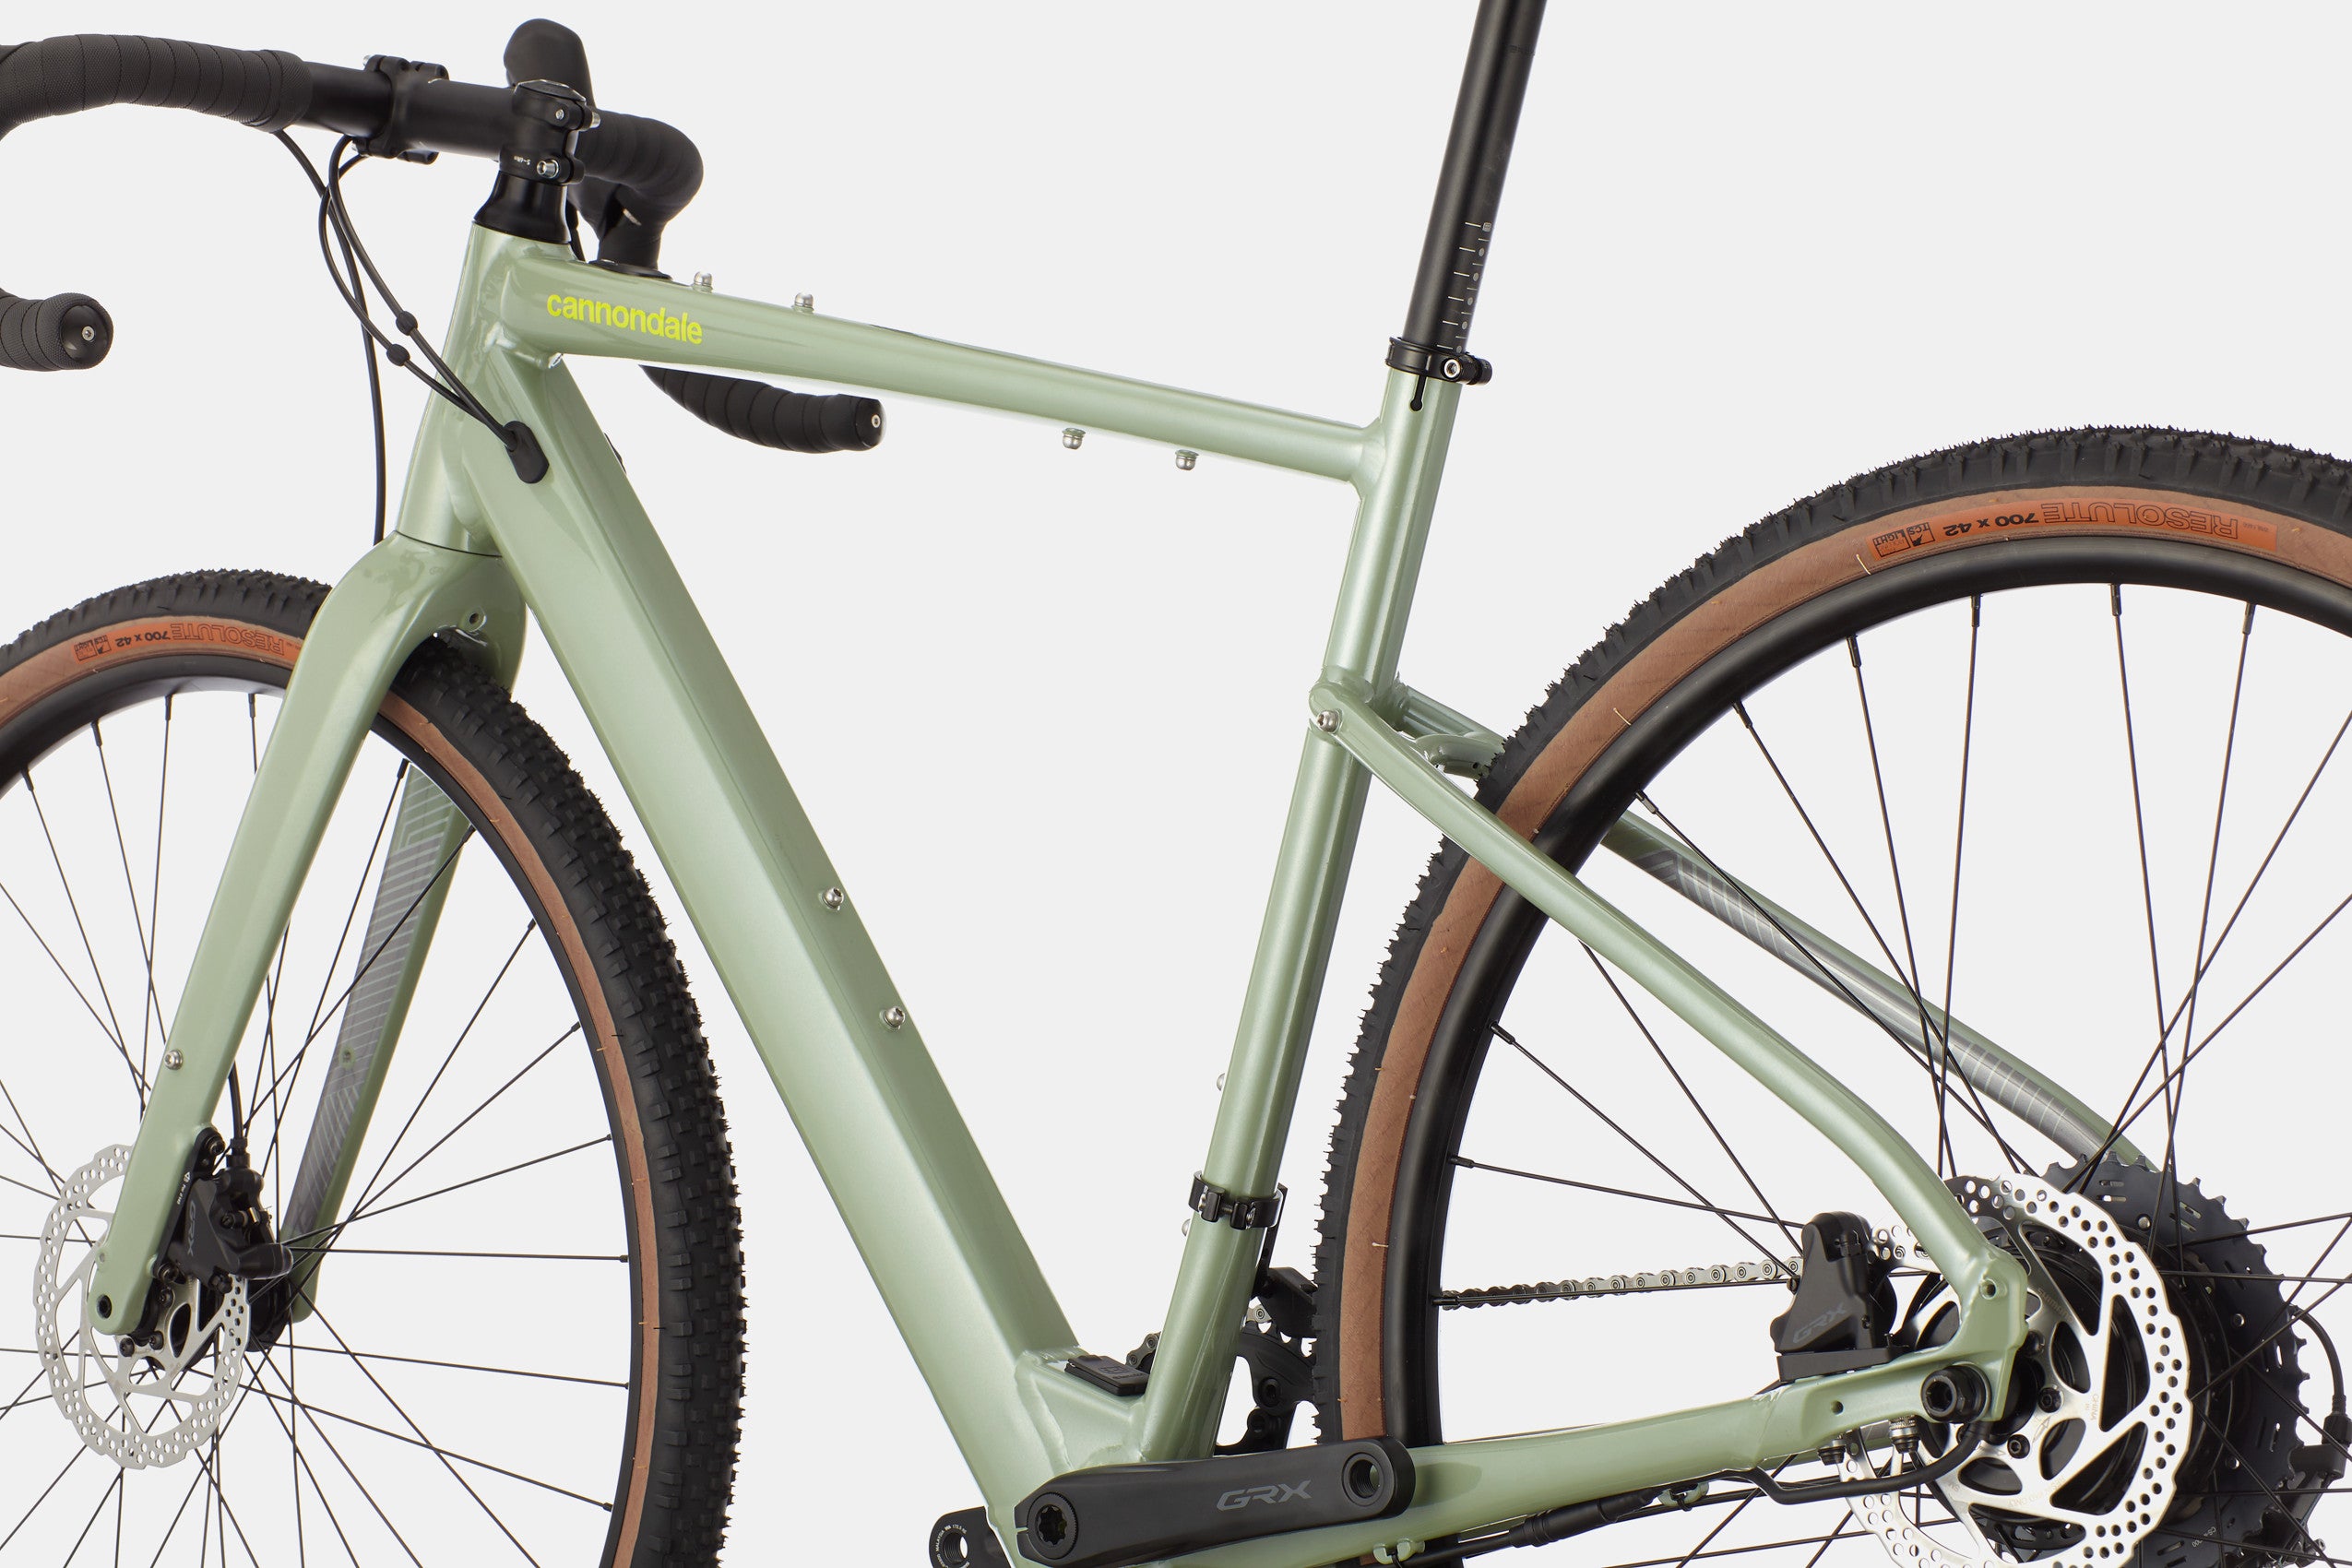 Cannondale Topstone Neo SL 1 Electric Gravel Bike - Agave